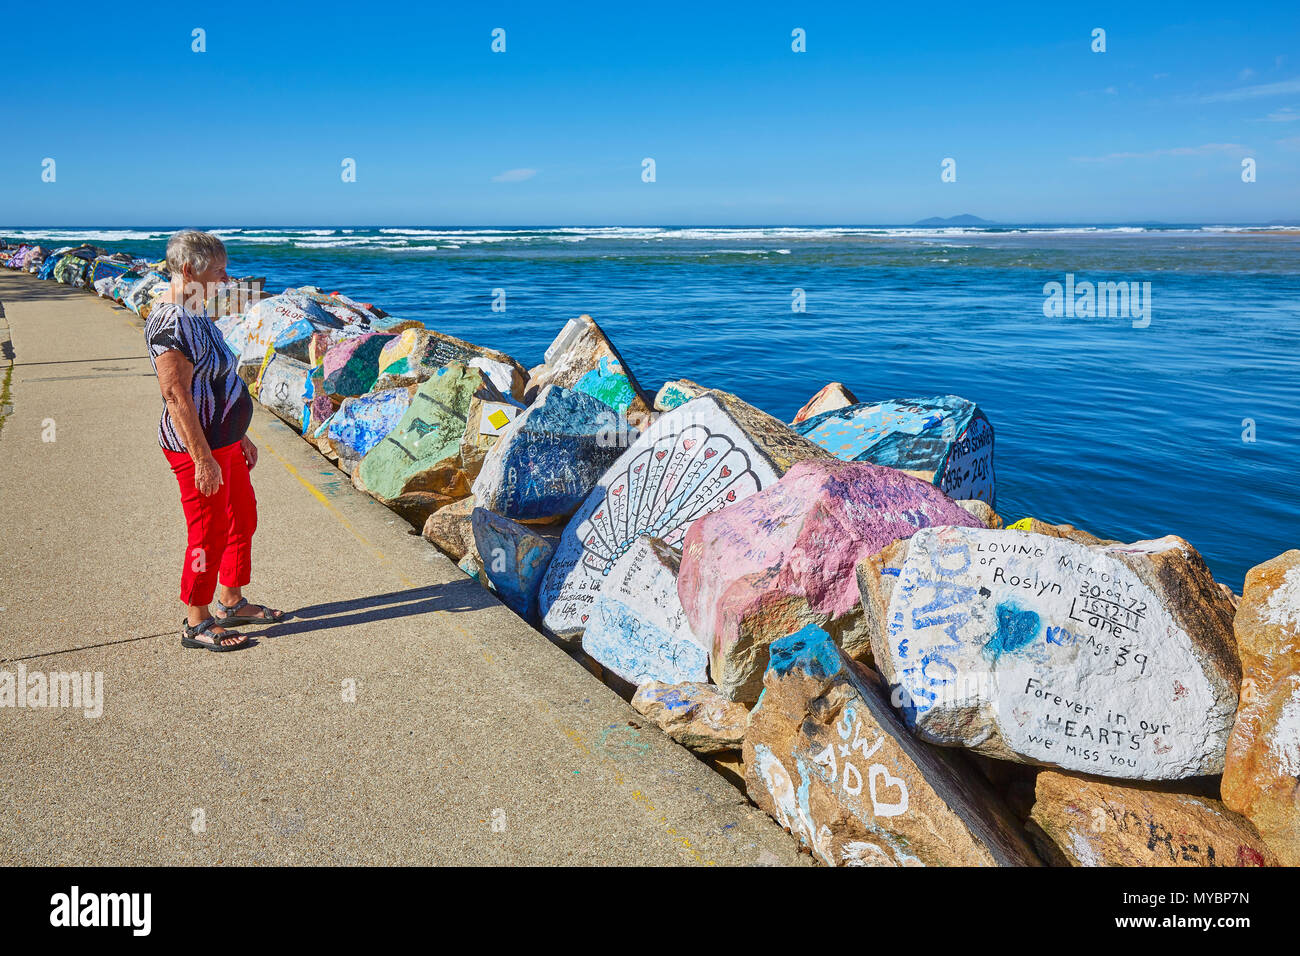 A woman on her own looking at the boulders decorated with signs and messages at the Vee Wall, Nambucca Heads, New South Wales, Australia Stock Photo